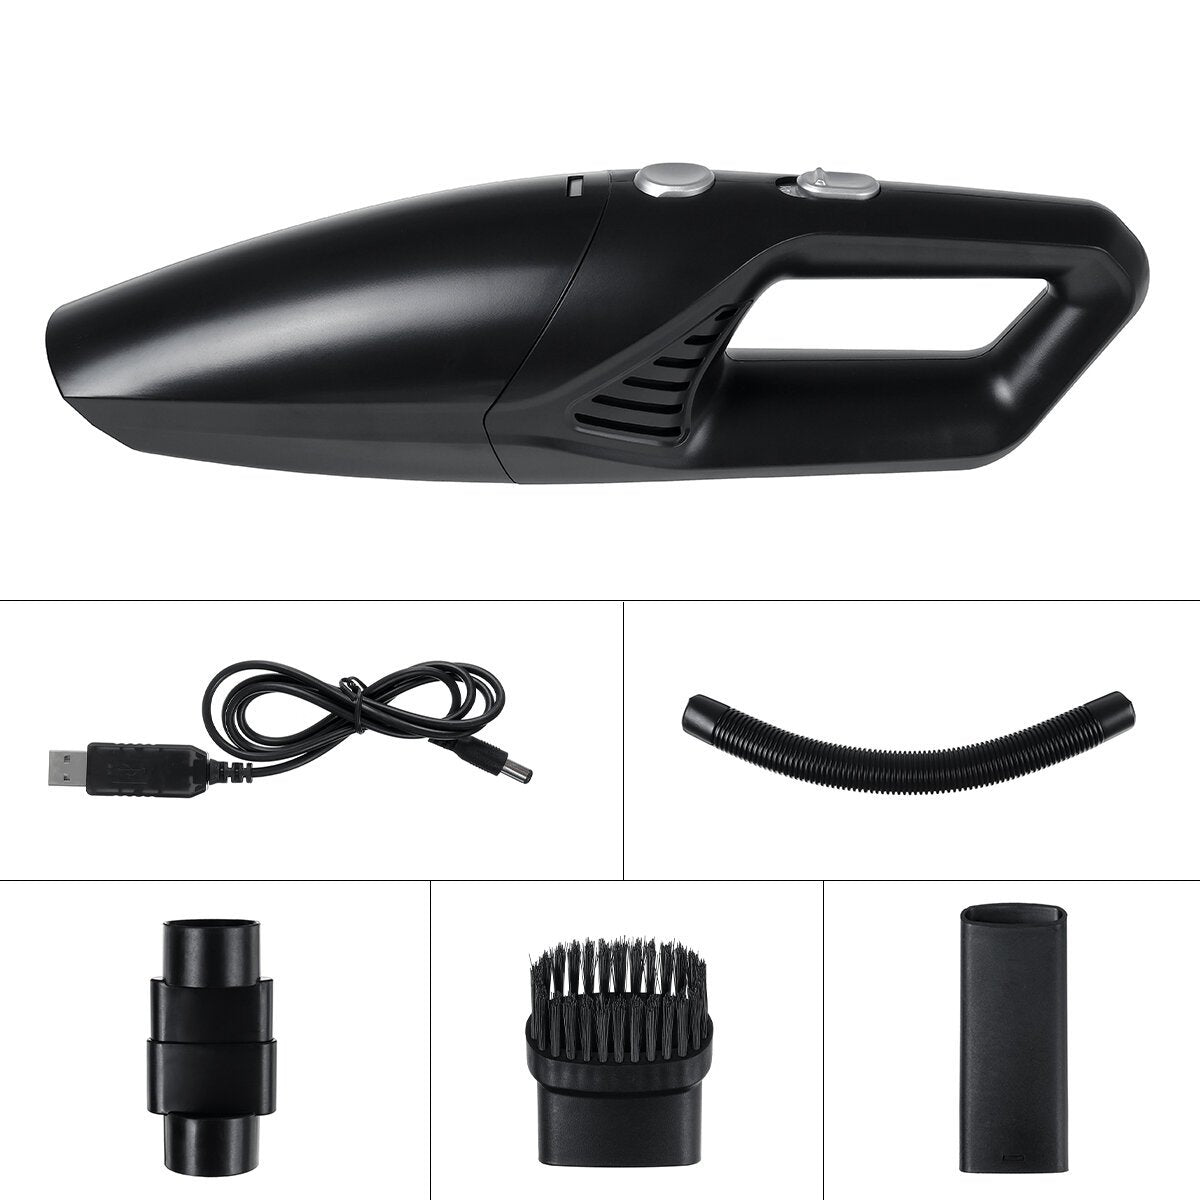 120W Car Vacuum Cleaner Handled Powerful Suction Portable Wet Dry Use Car Home